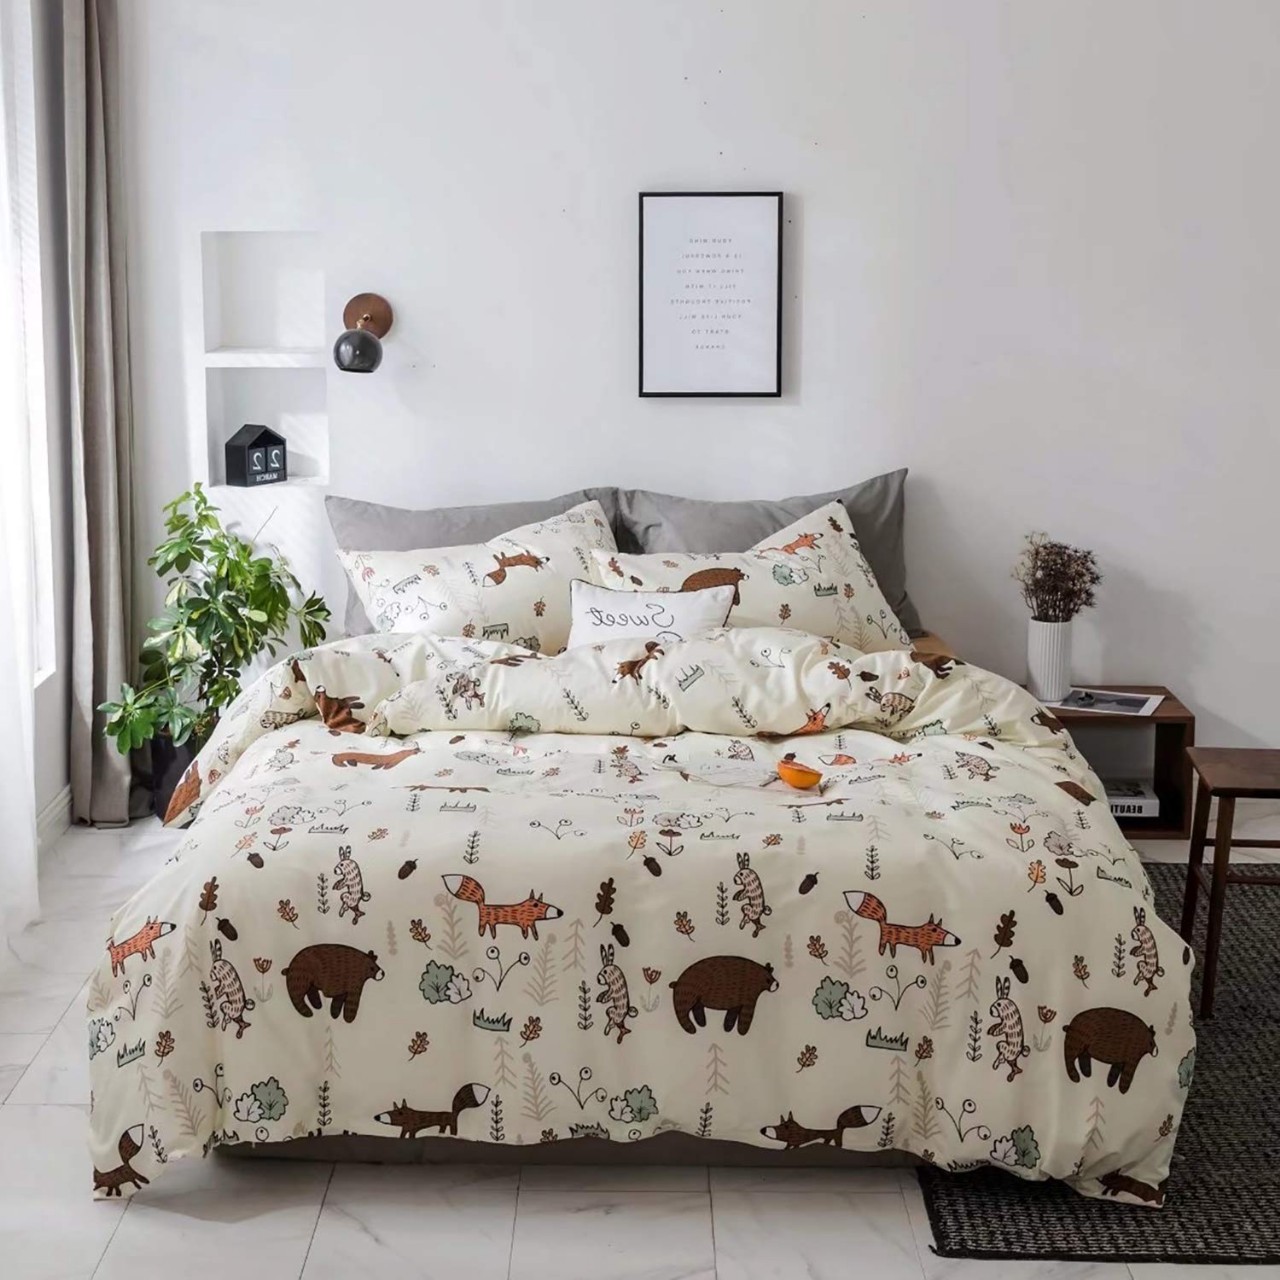 Jumeey Duvet Cover Bear Print 3 Pieces Animal Kids Bedding Sets Twin Yellow for Boys Girls 100%